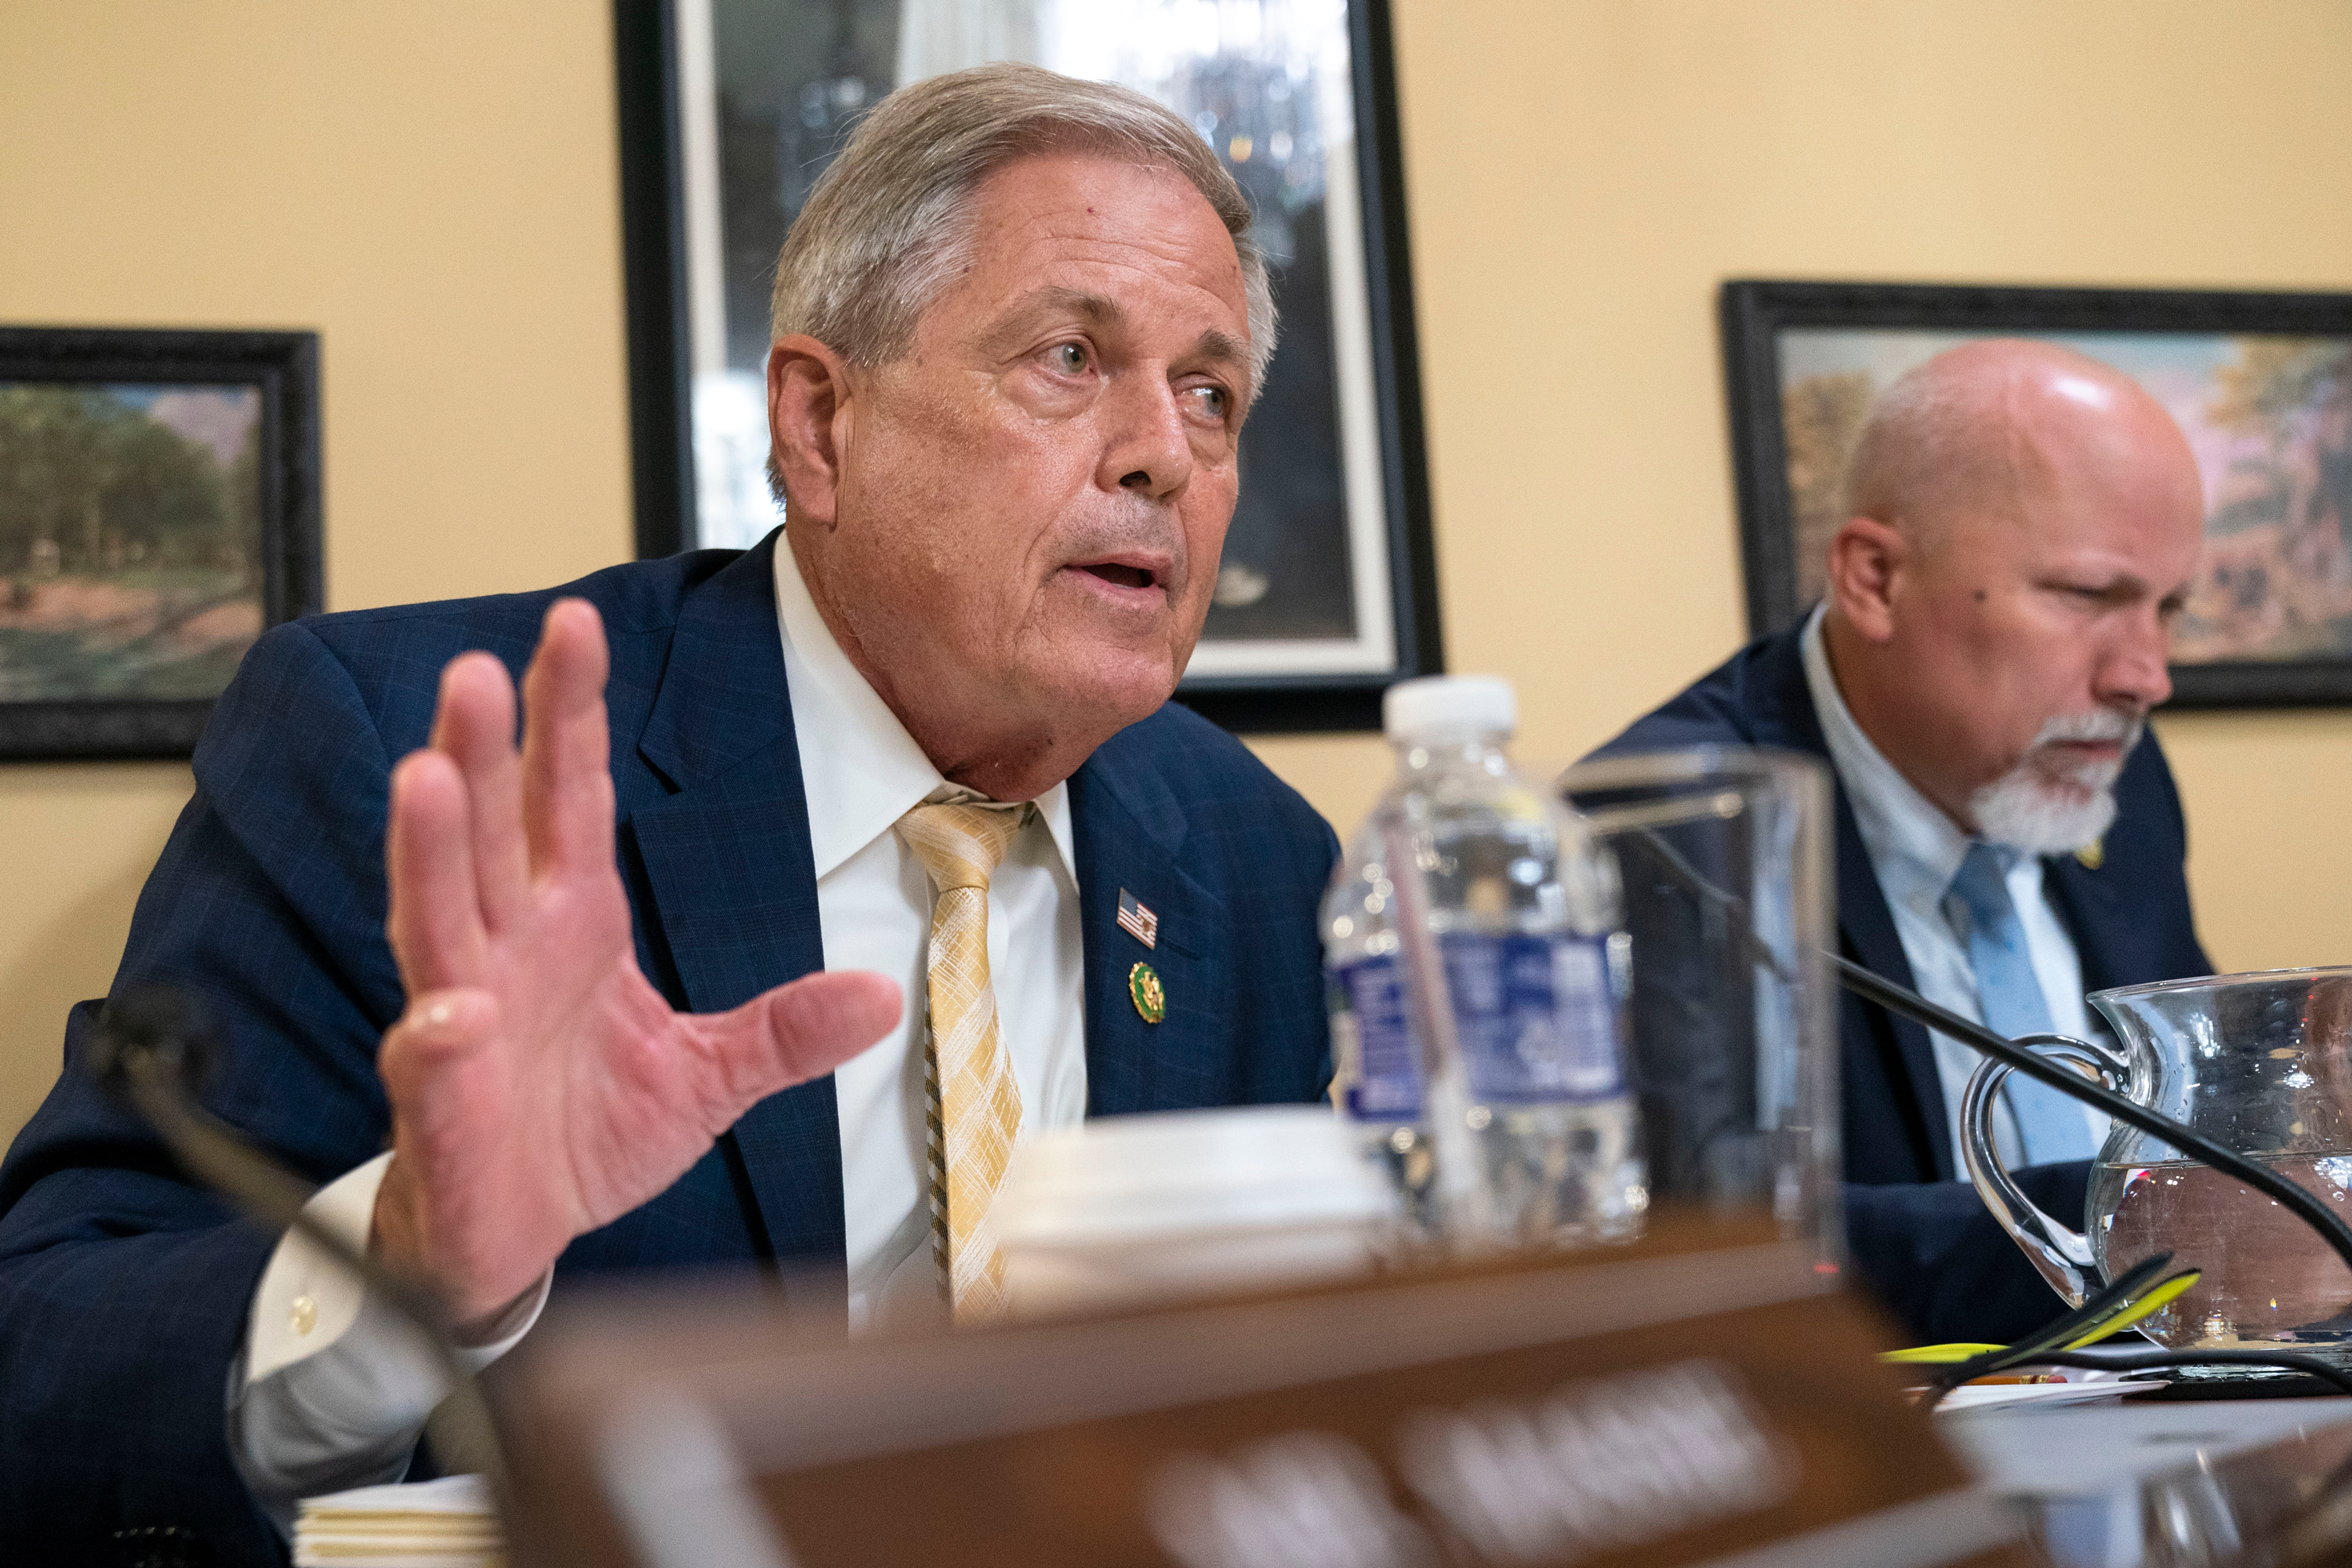 Rep. Ralph Norman, left, speaks next to Rep. Chip Roy, as the House Rules Committee discuss the debt limit bill, The Fiscal Responsibility Act of 2023, for a vote on the floor at the Capitol in Washington, DC, on Tuesday.